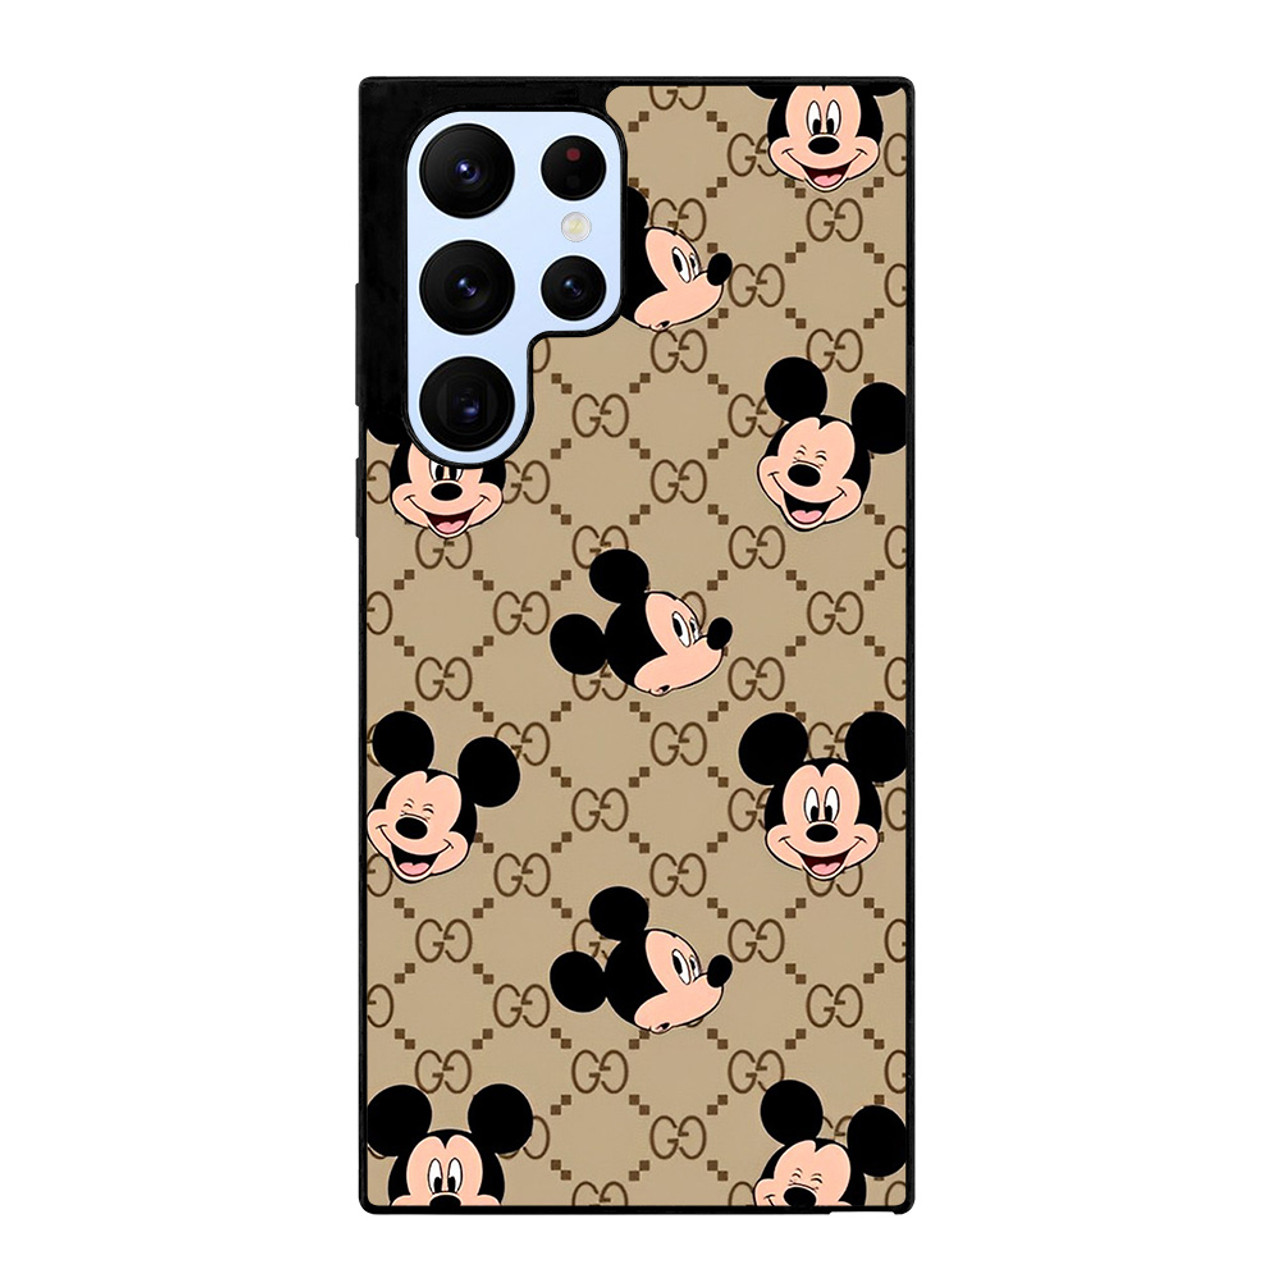 Gucci Mickey Mouse Samsung Galaxy S22 Ultra Case